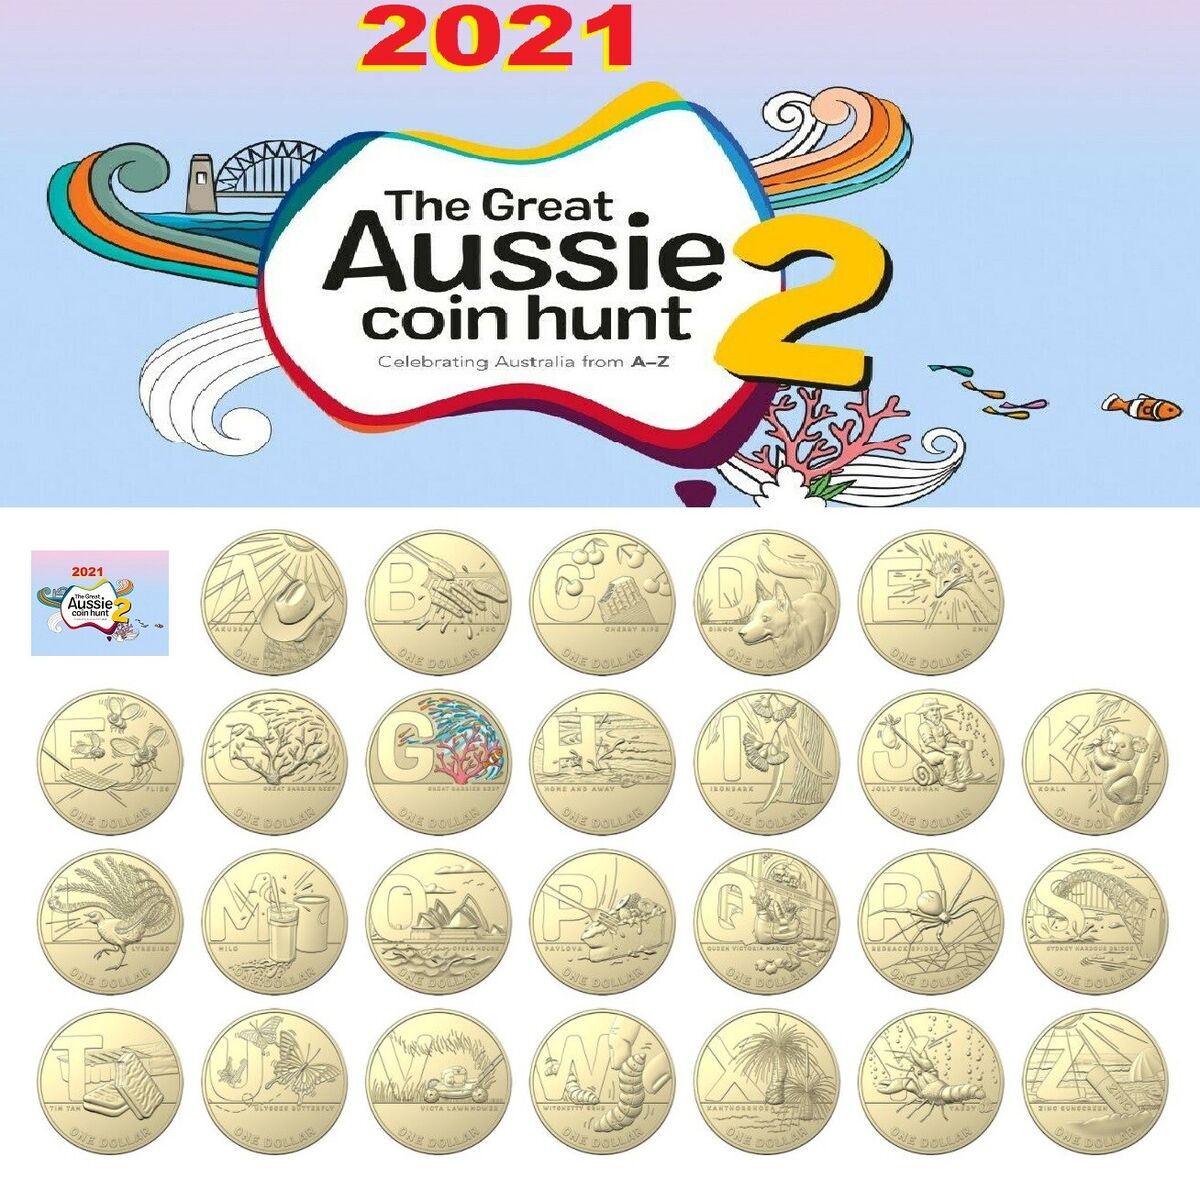 Australia Post offers circulating A to Z series dollar coins